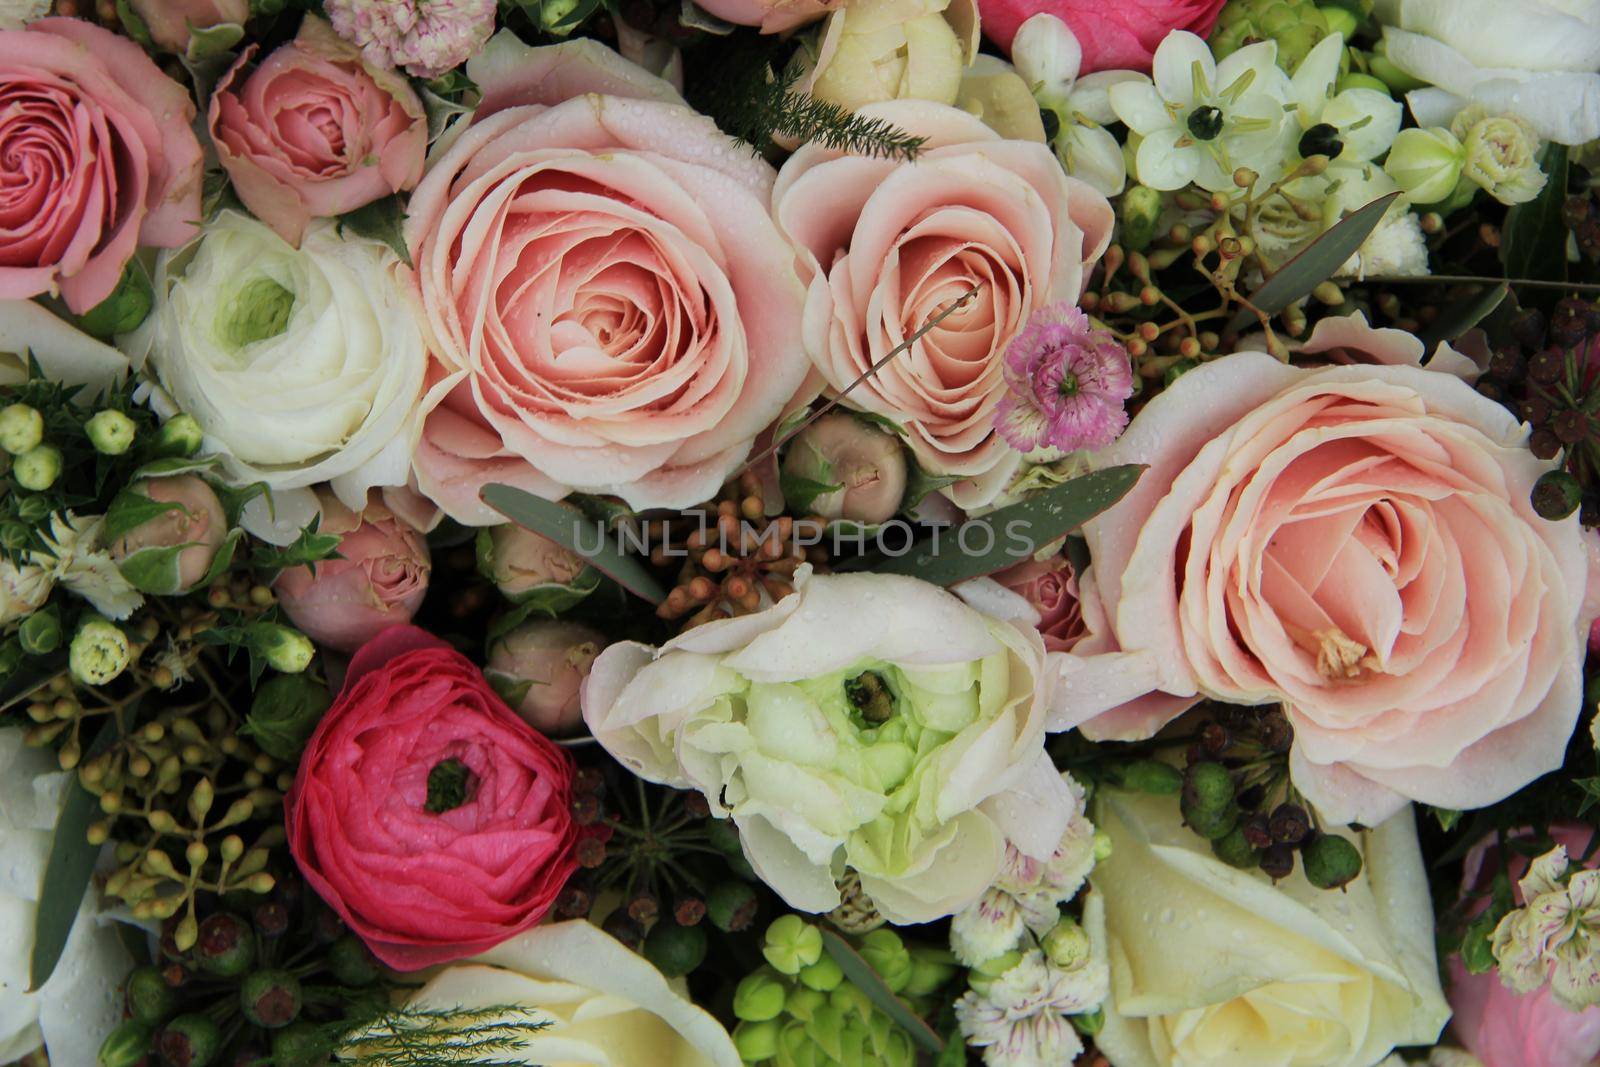 Mixed wedding flower arrangement: various flowers in different pastel colors by studioportosabbia